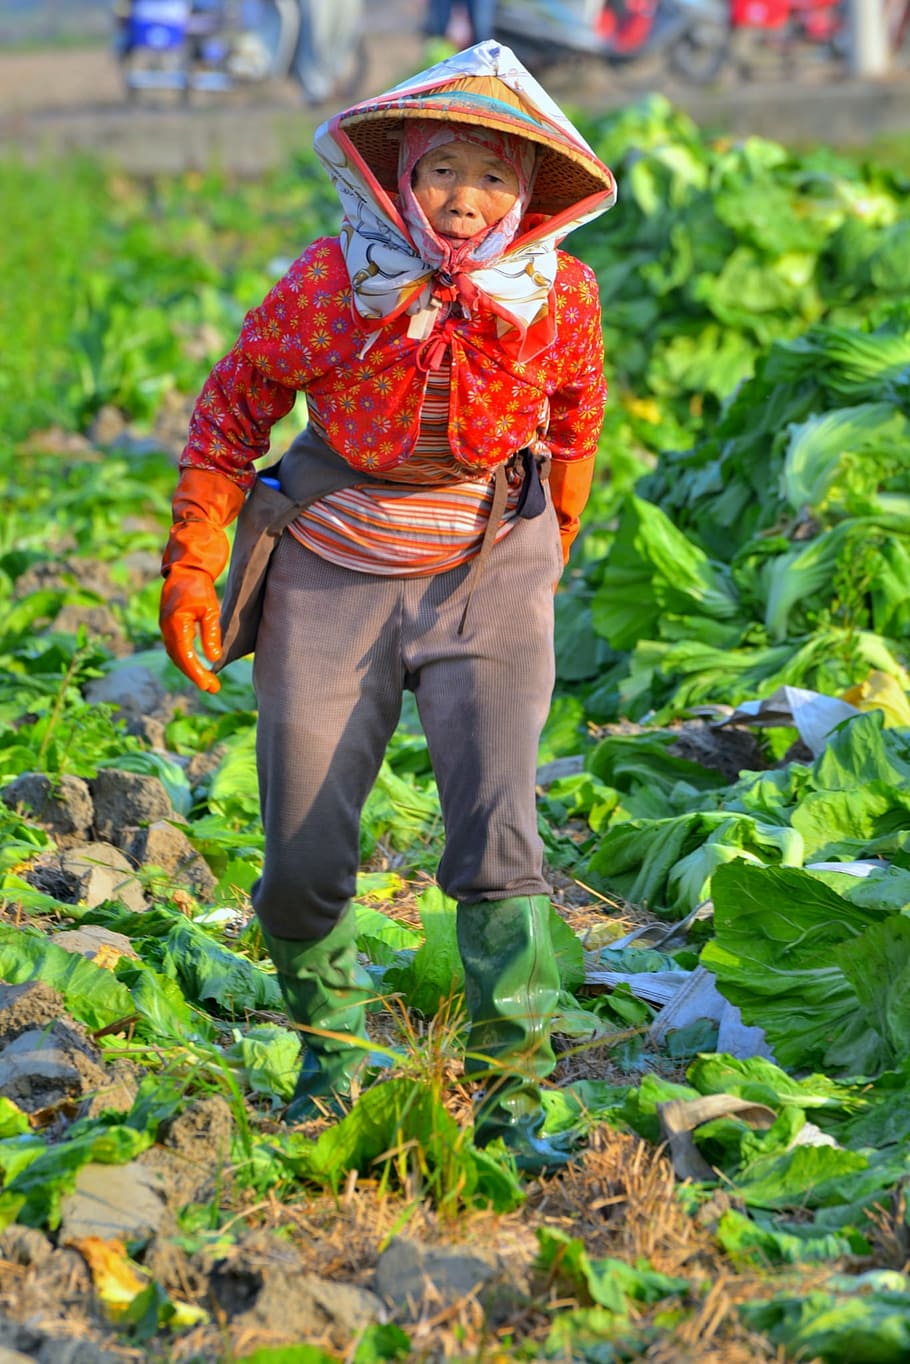 humanities, cultivate, rural, old, lady, woman, worker, country, agriculture, field